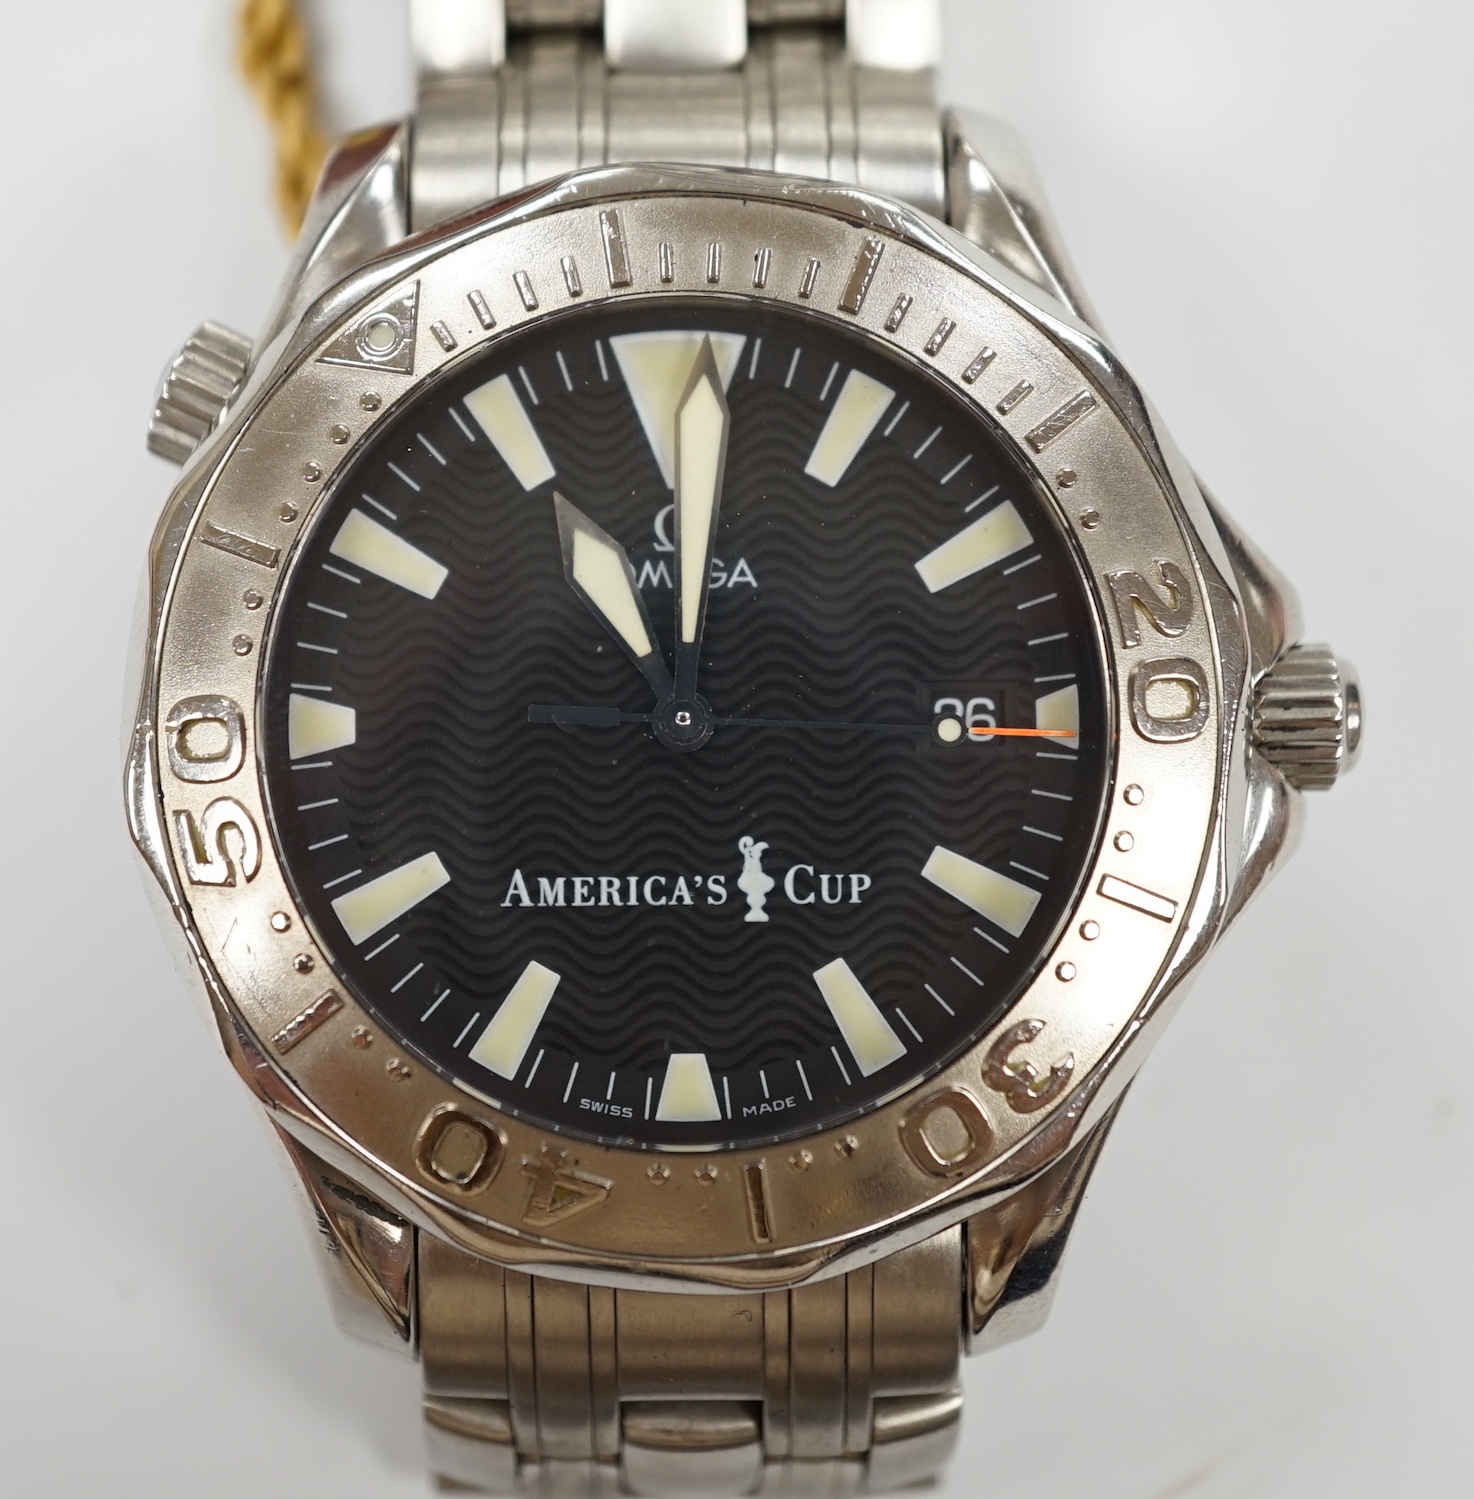 A gentleman's 2000 stainless steel Omega Seamaster Professional America's Cup wrist watch, with box and papers.